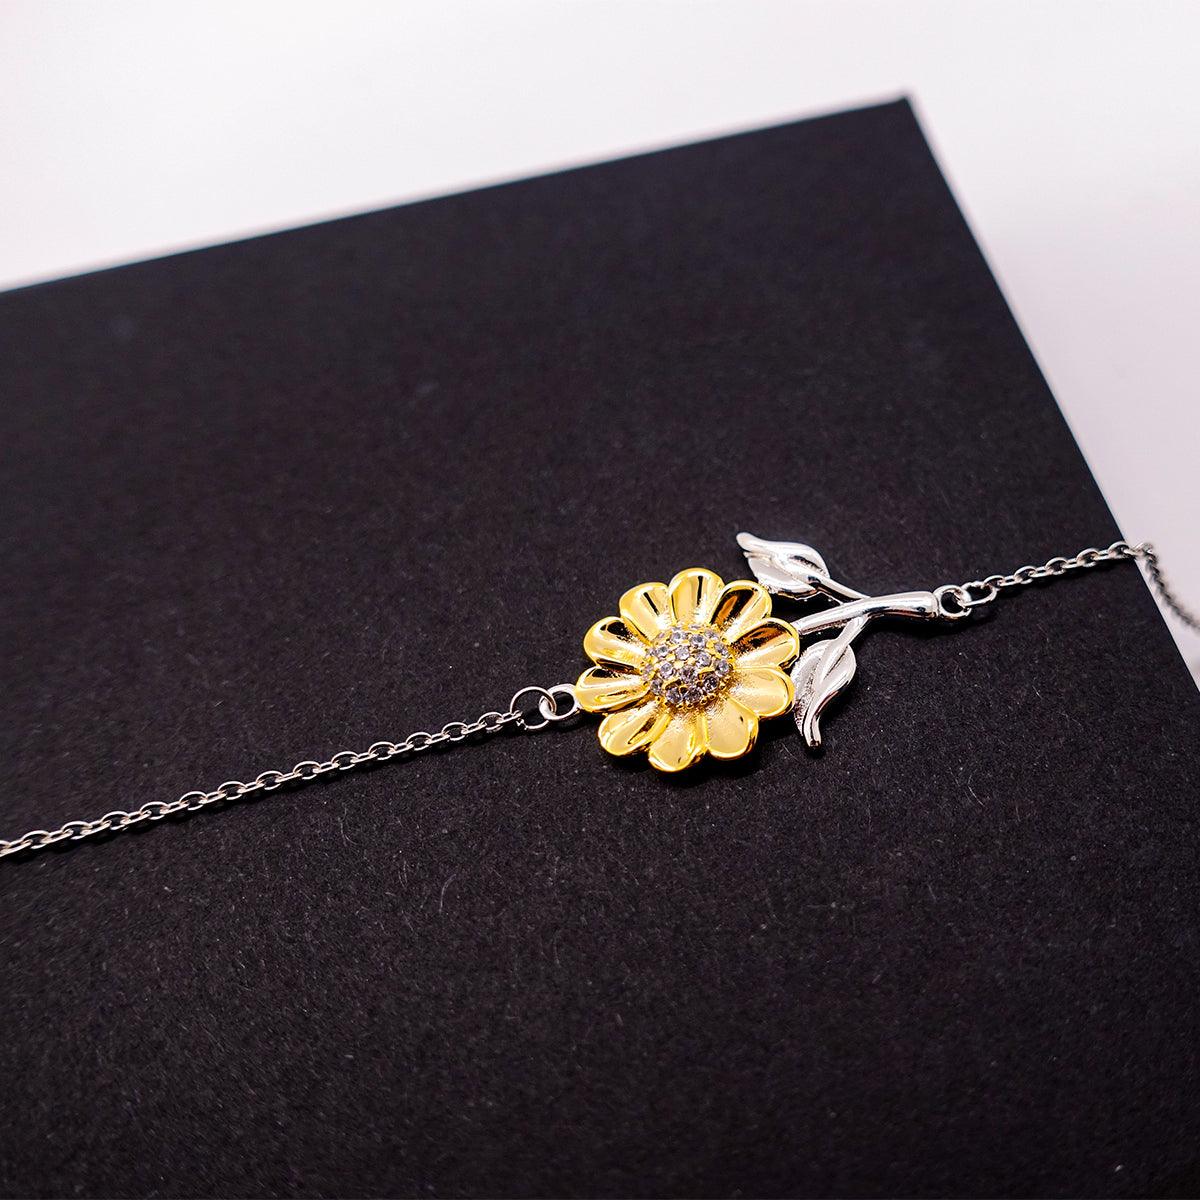 I Left My Heart In Indiana Gifts, Meaningful Indiana State for Friends, Men, Women. Sunflower Bracelet for Indiana People - Mallard Moon Gift Shop